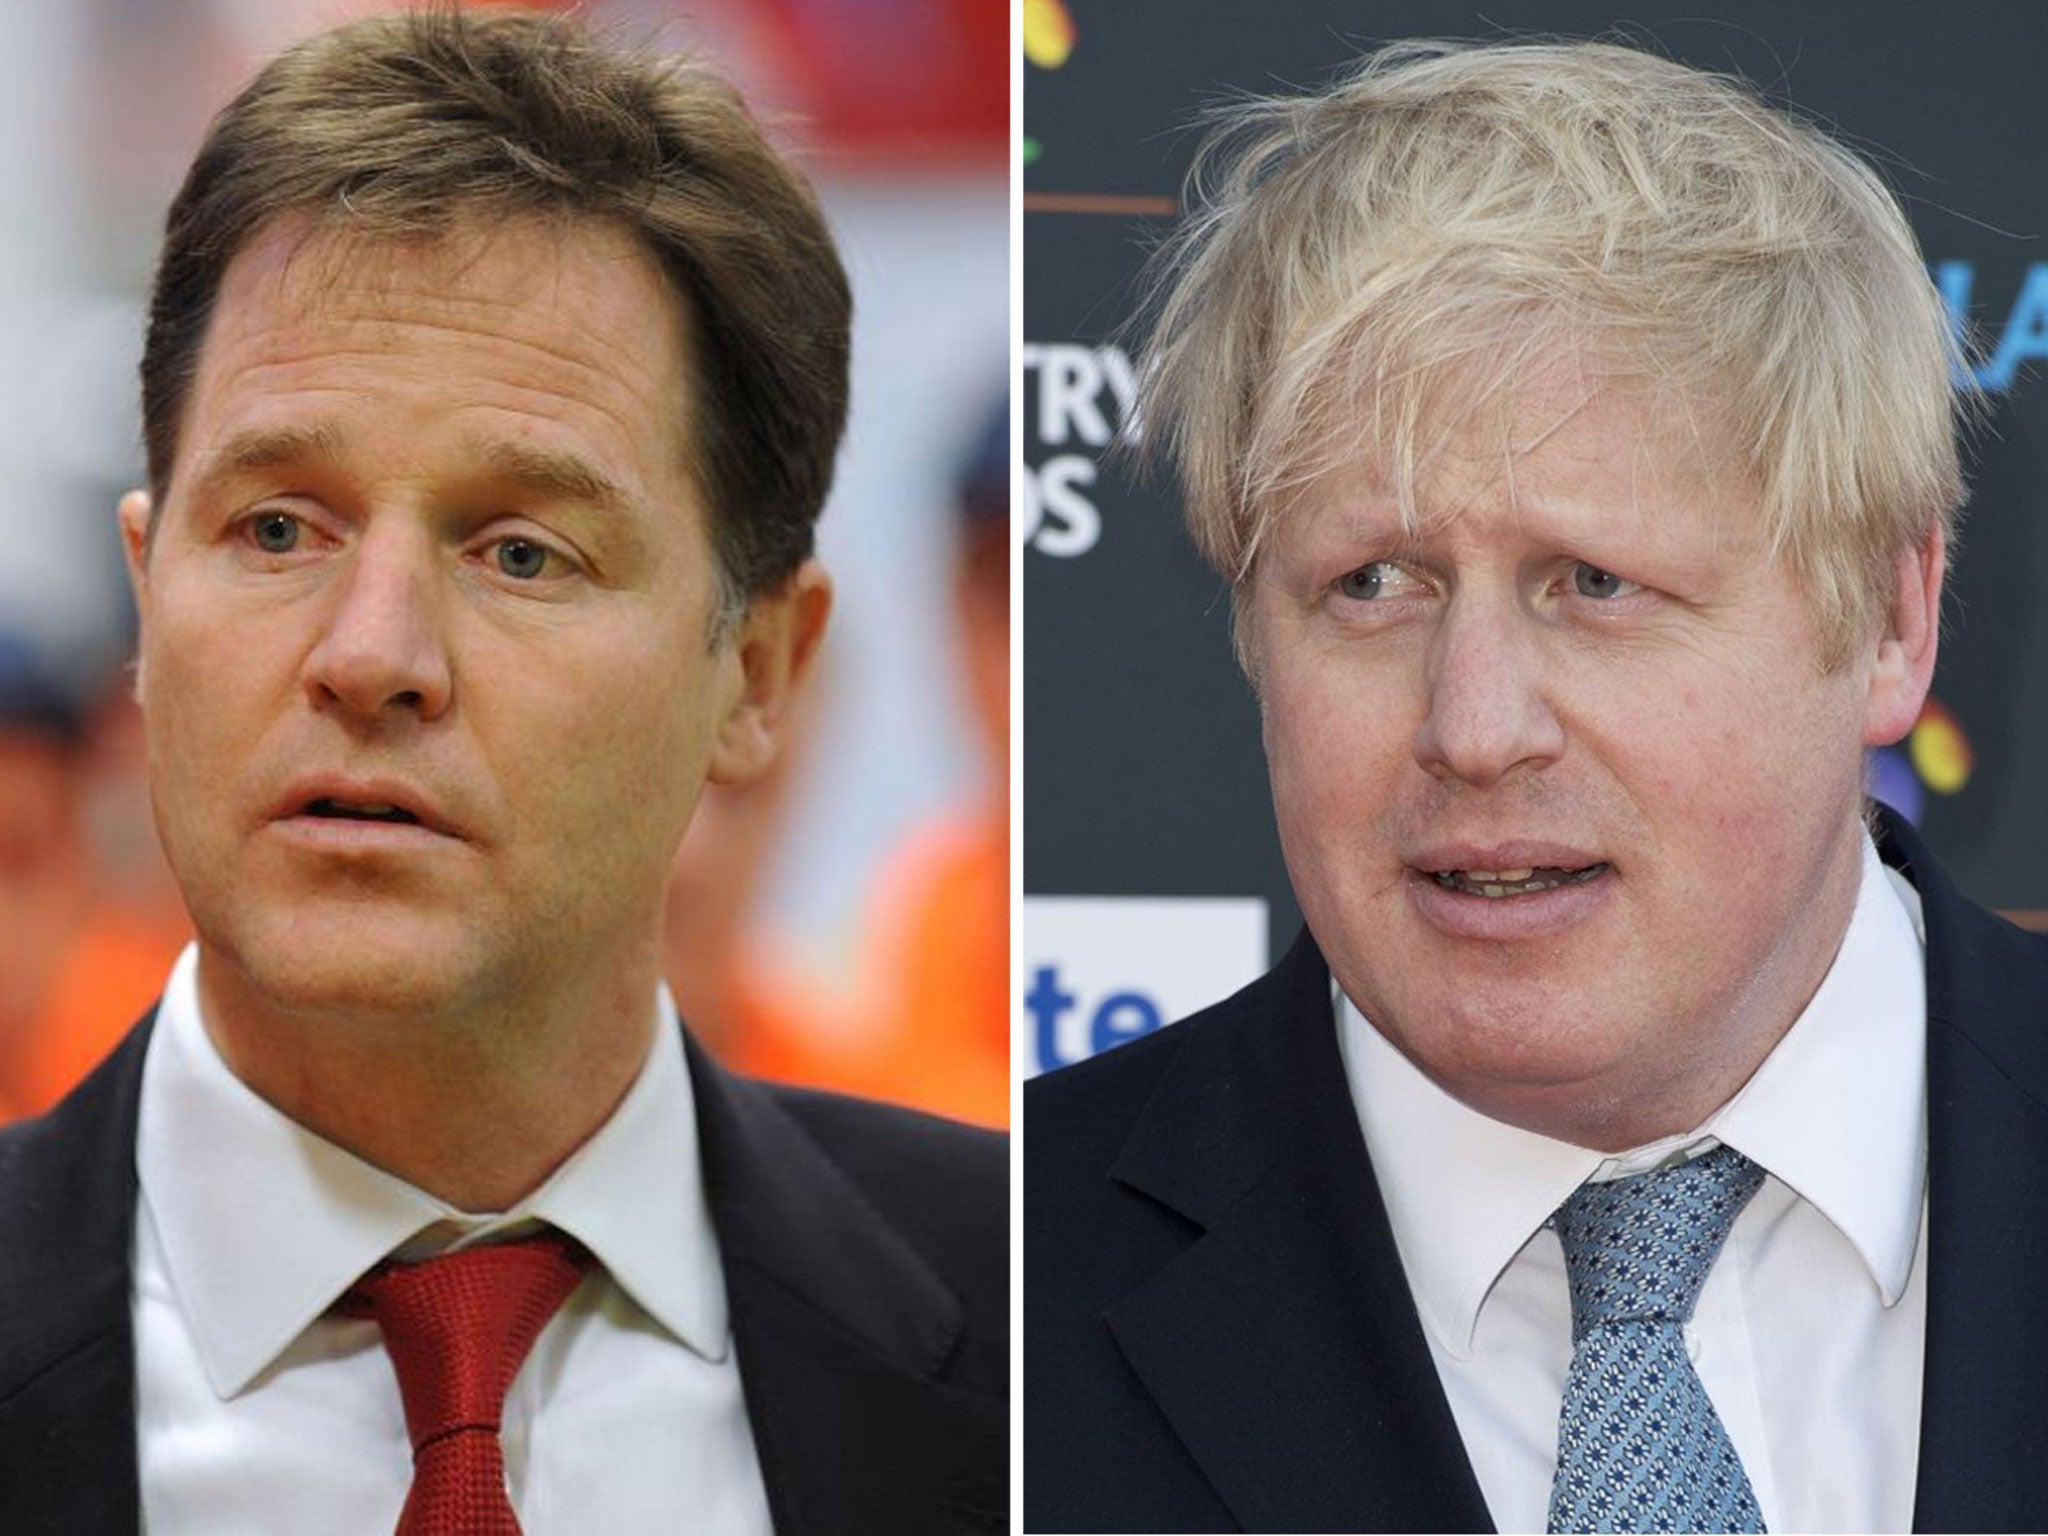 Johnson's attack on Clegg is the latest in an ongoing spat between the two men